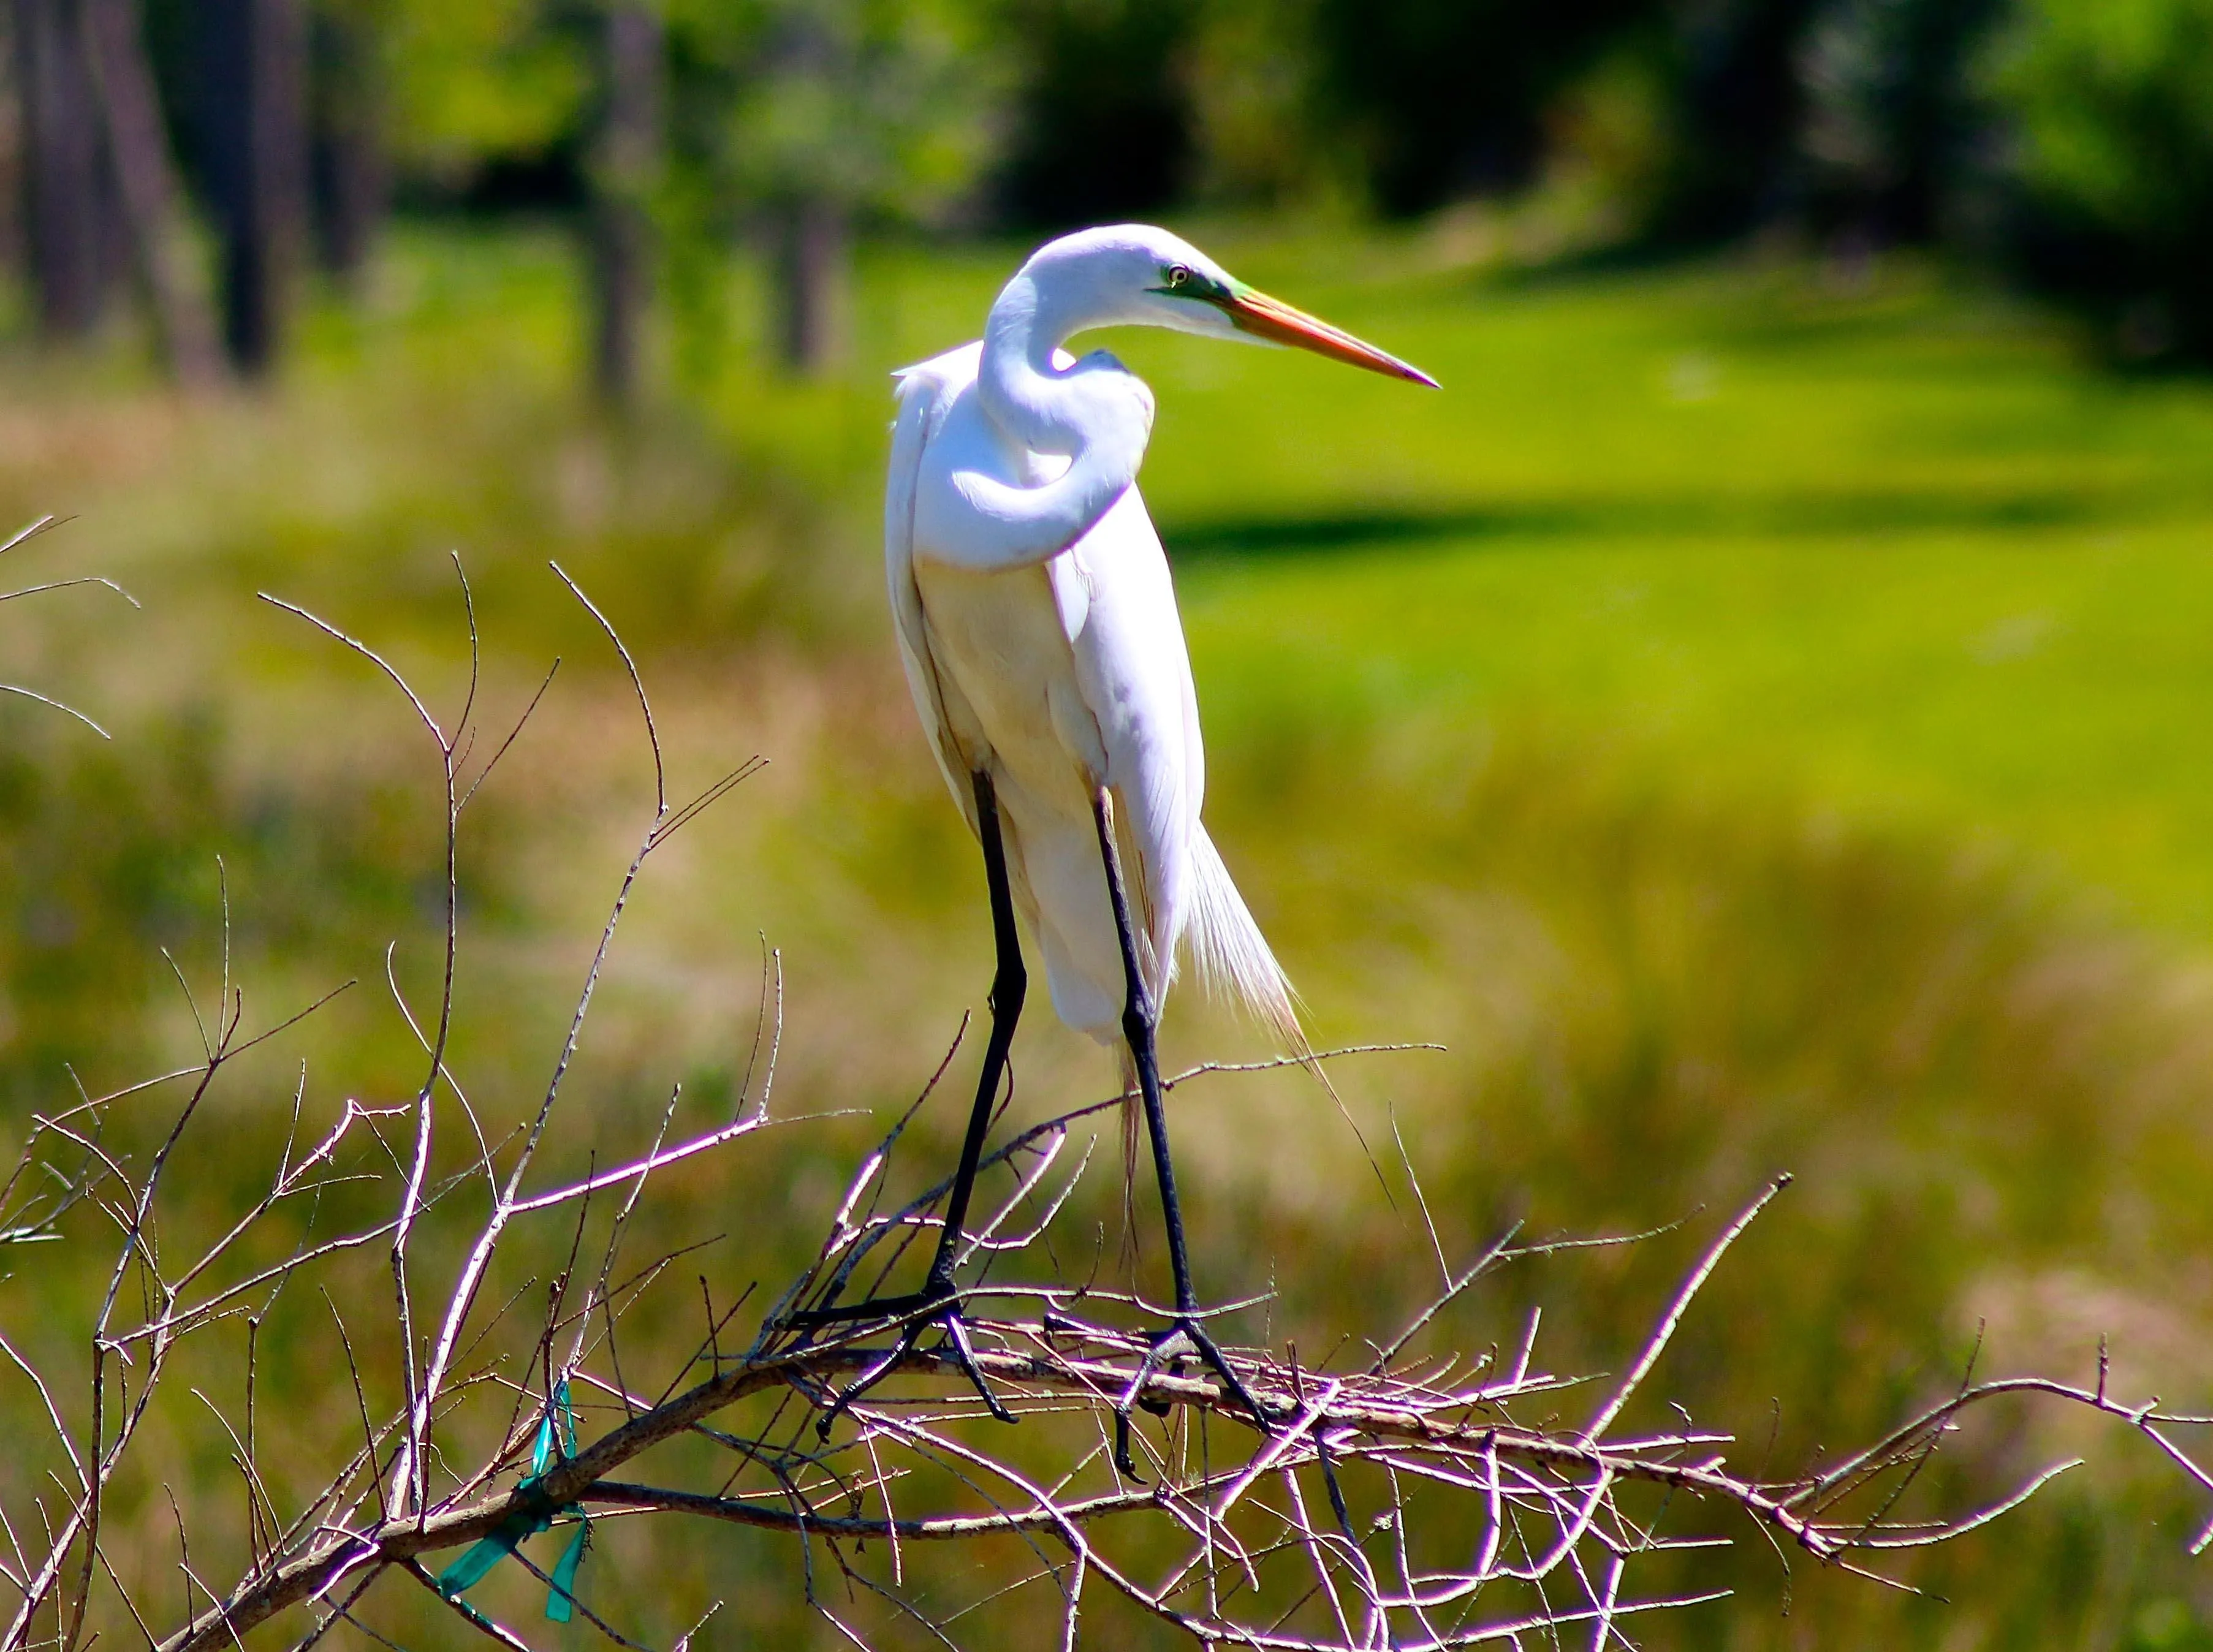  A white bird perched gracefully on a tree branch.